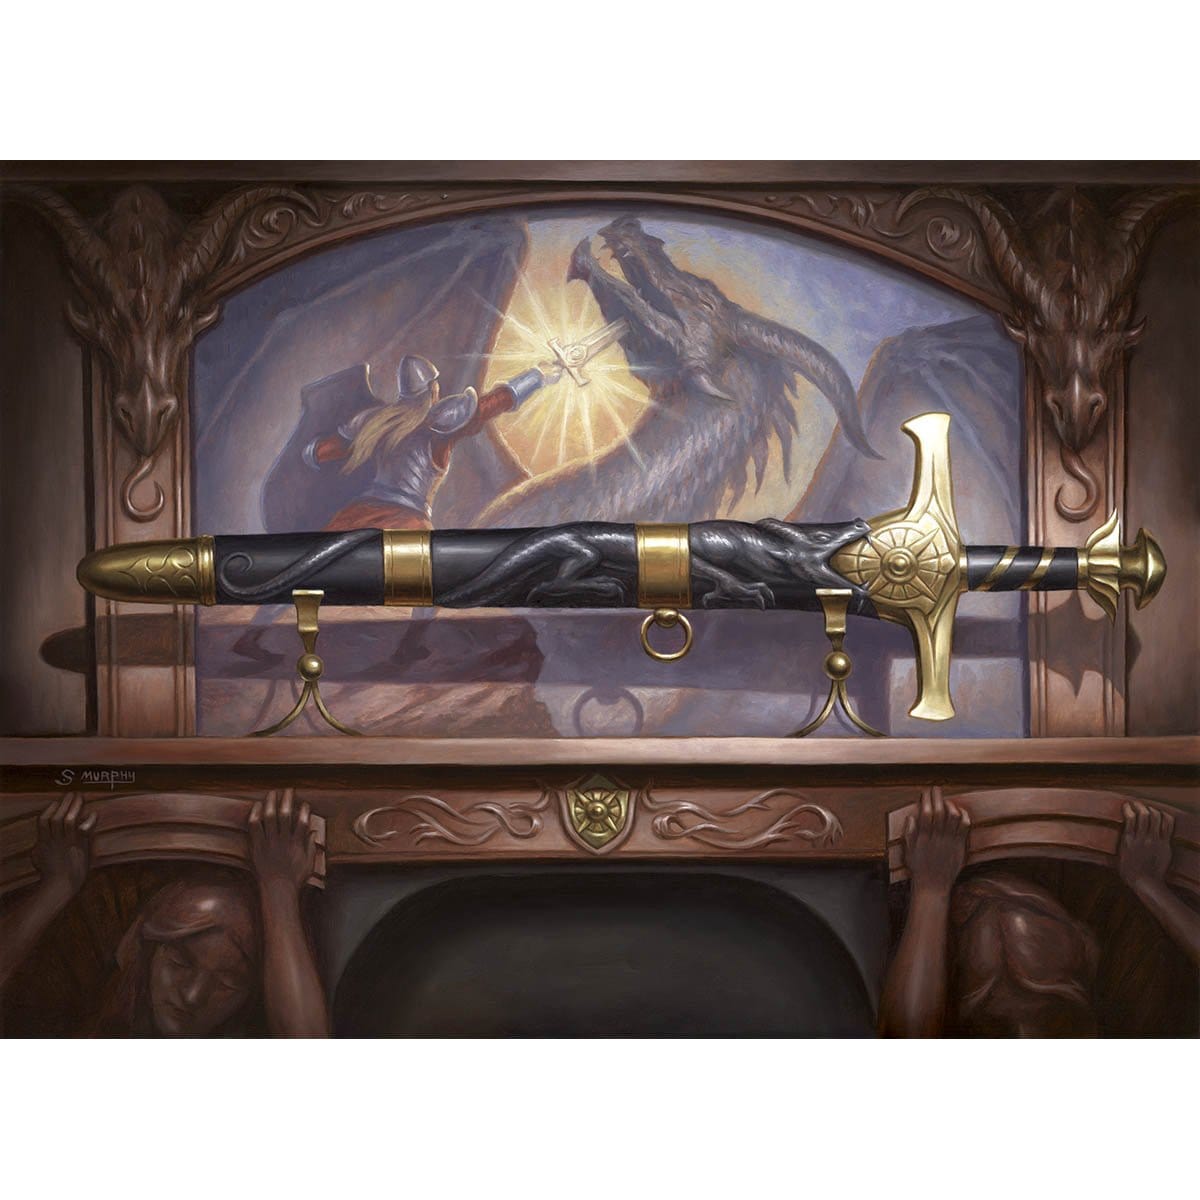 Ancestral Blade Print - Print - Original Magic Art - Accessories for Magic the Gathering and other card games